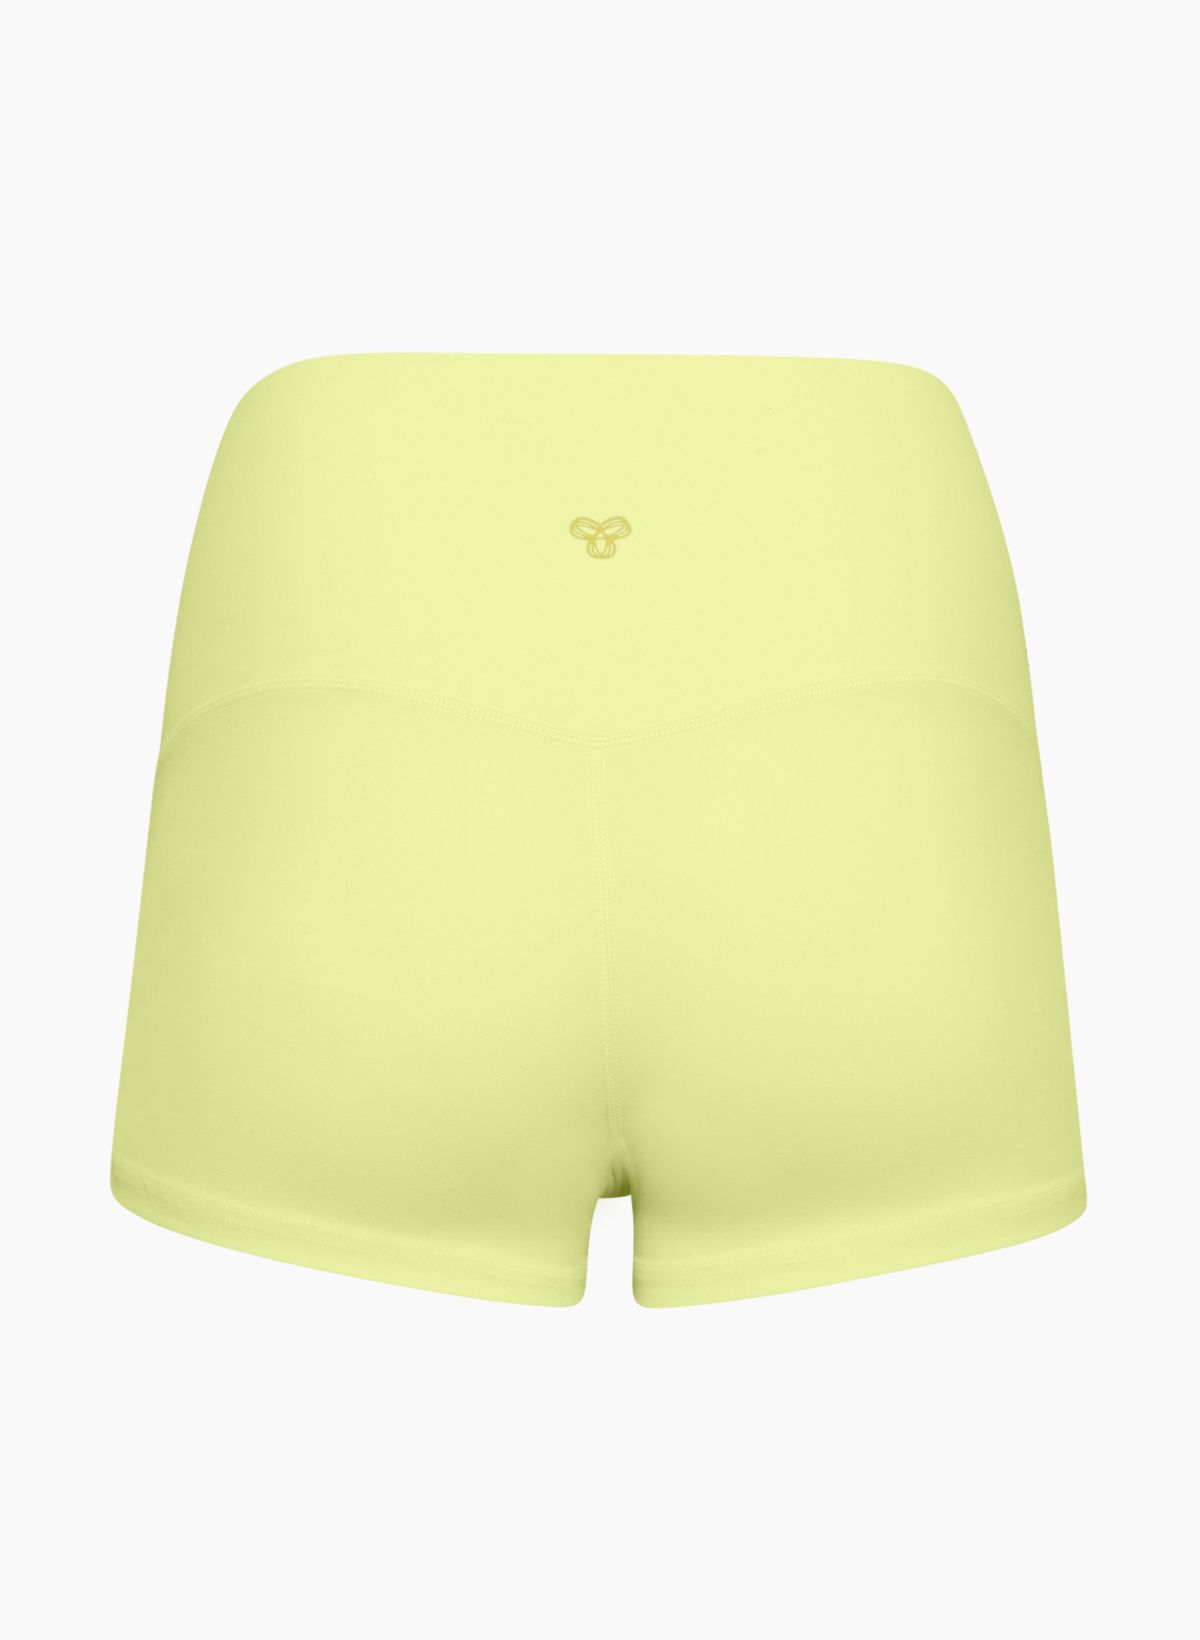 Butter Yellow TnaBUTTER 7” Bike Shorts (M) + Malibu Tank (Lol @ “tank”) (M)  Sized up due to sheerness, more info in comments. : r/Aritzia